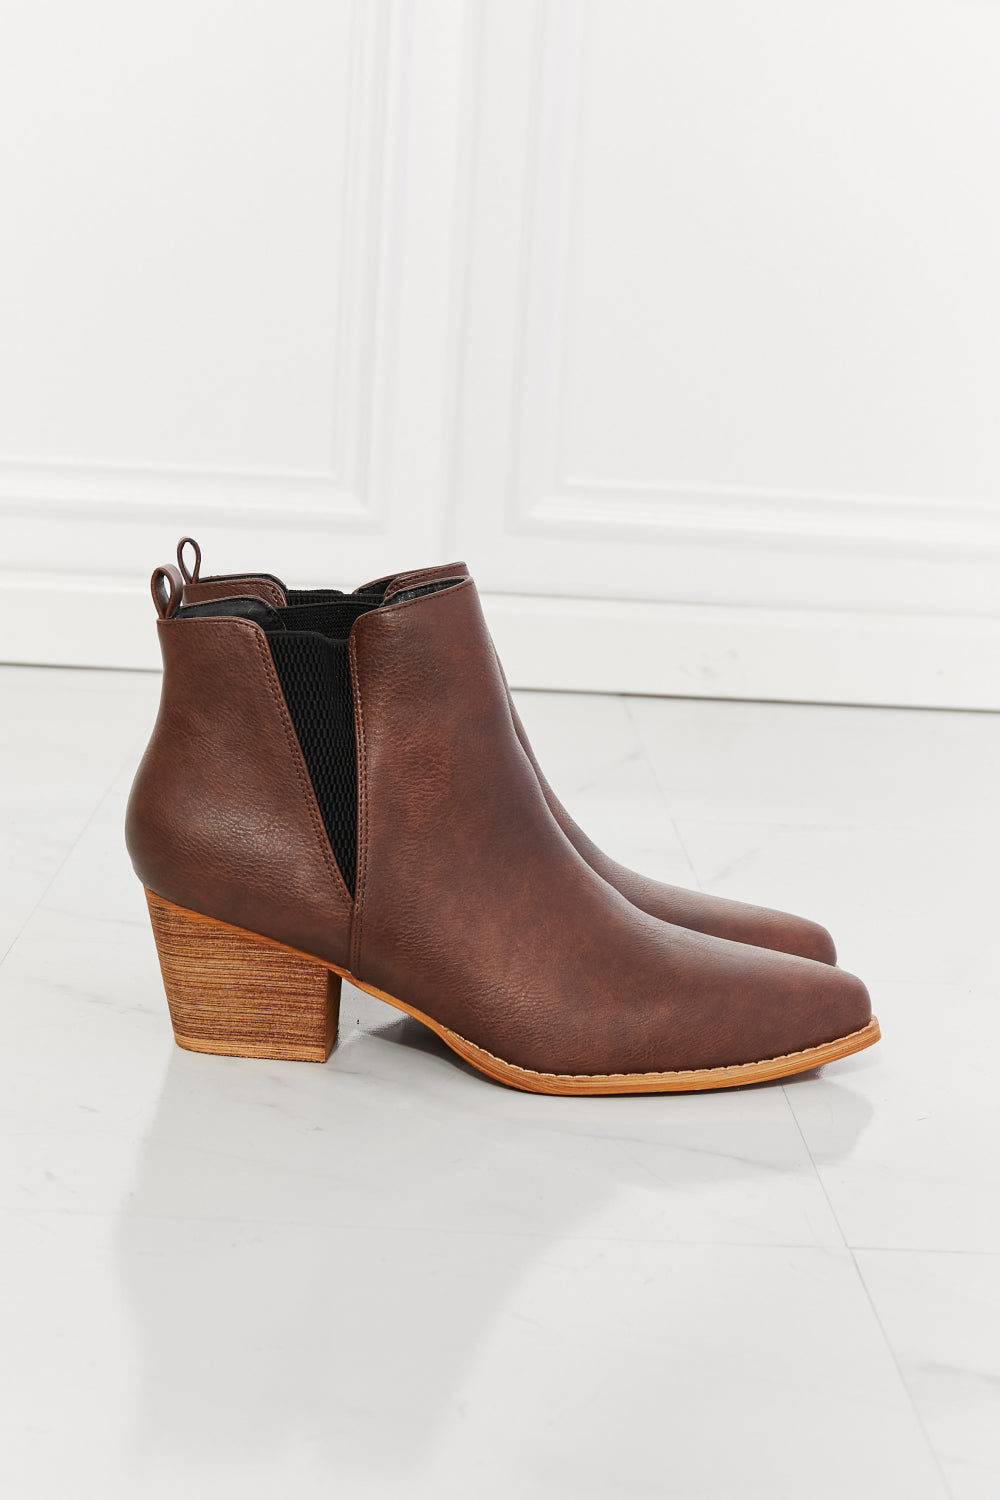 MMShoes Back At It Point Toe Bootie in Chocolate - AllIn Computer